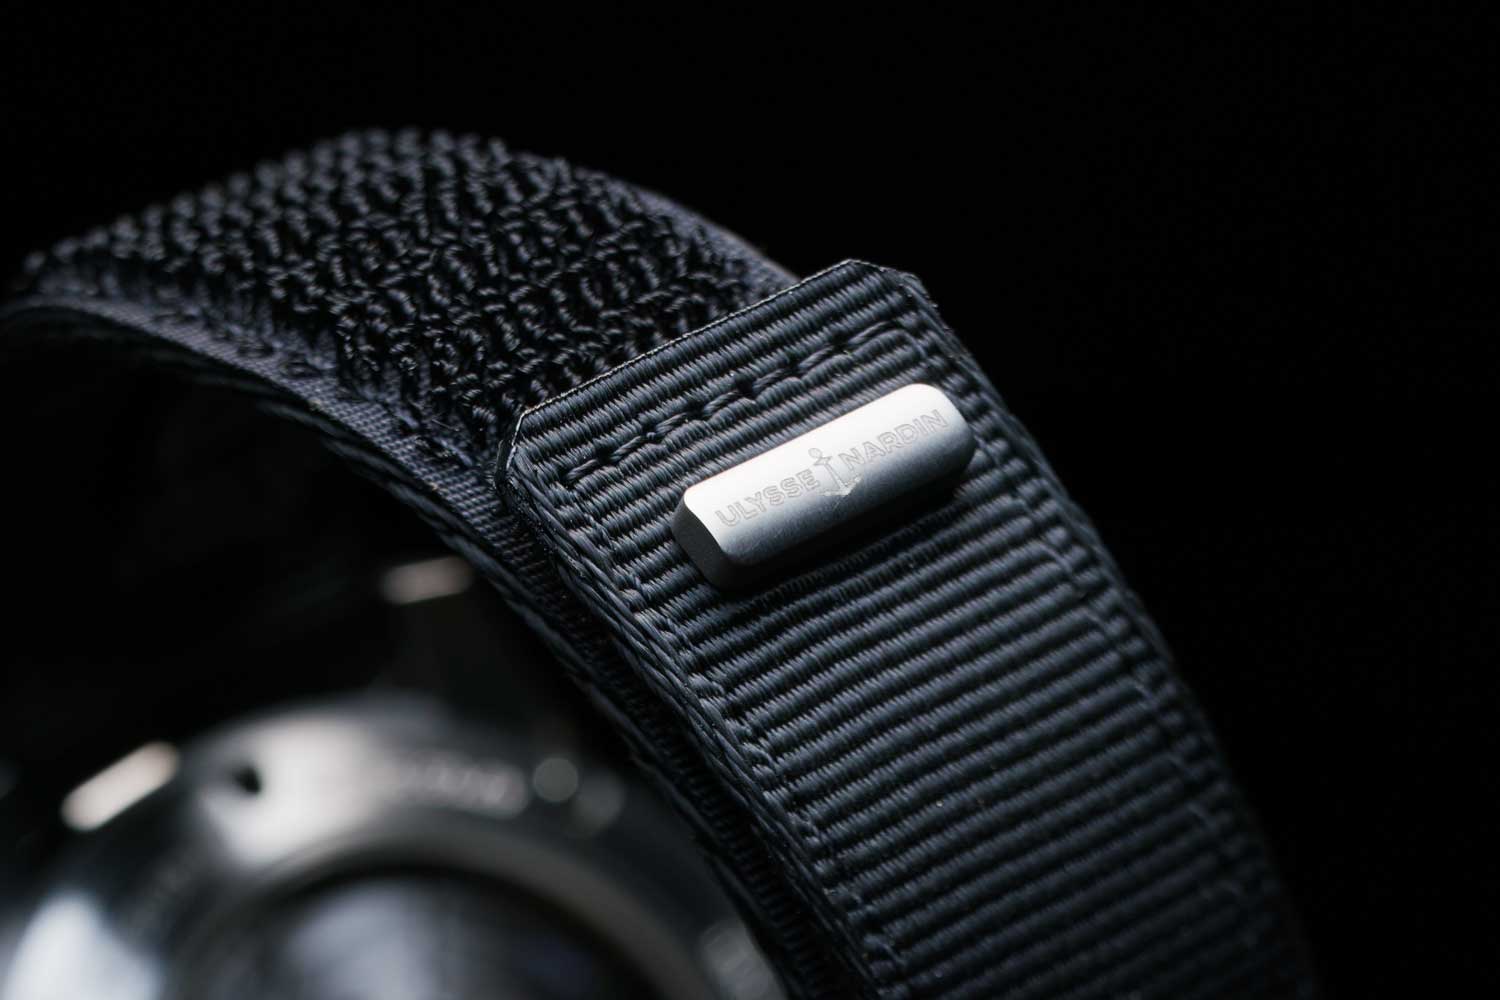 The Ulysse Nardin R-Strap fitted on a Diver 44mm